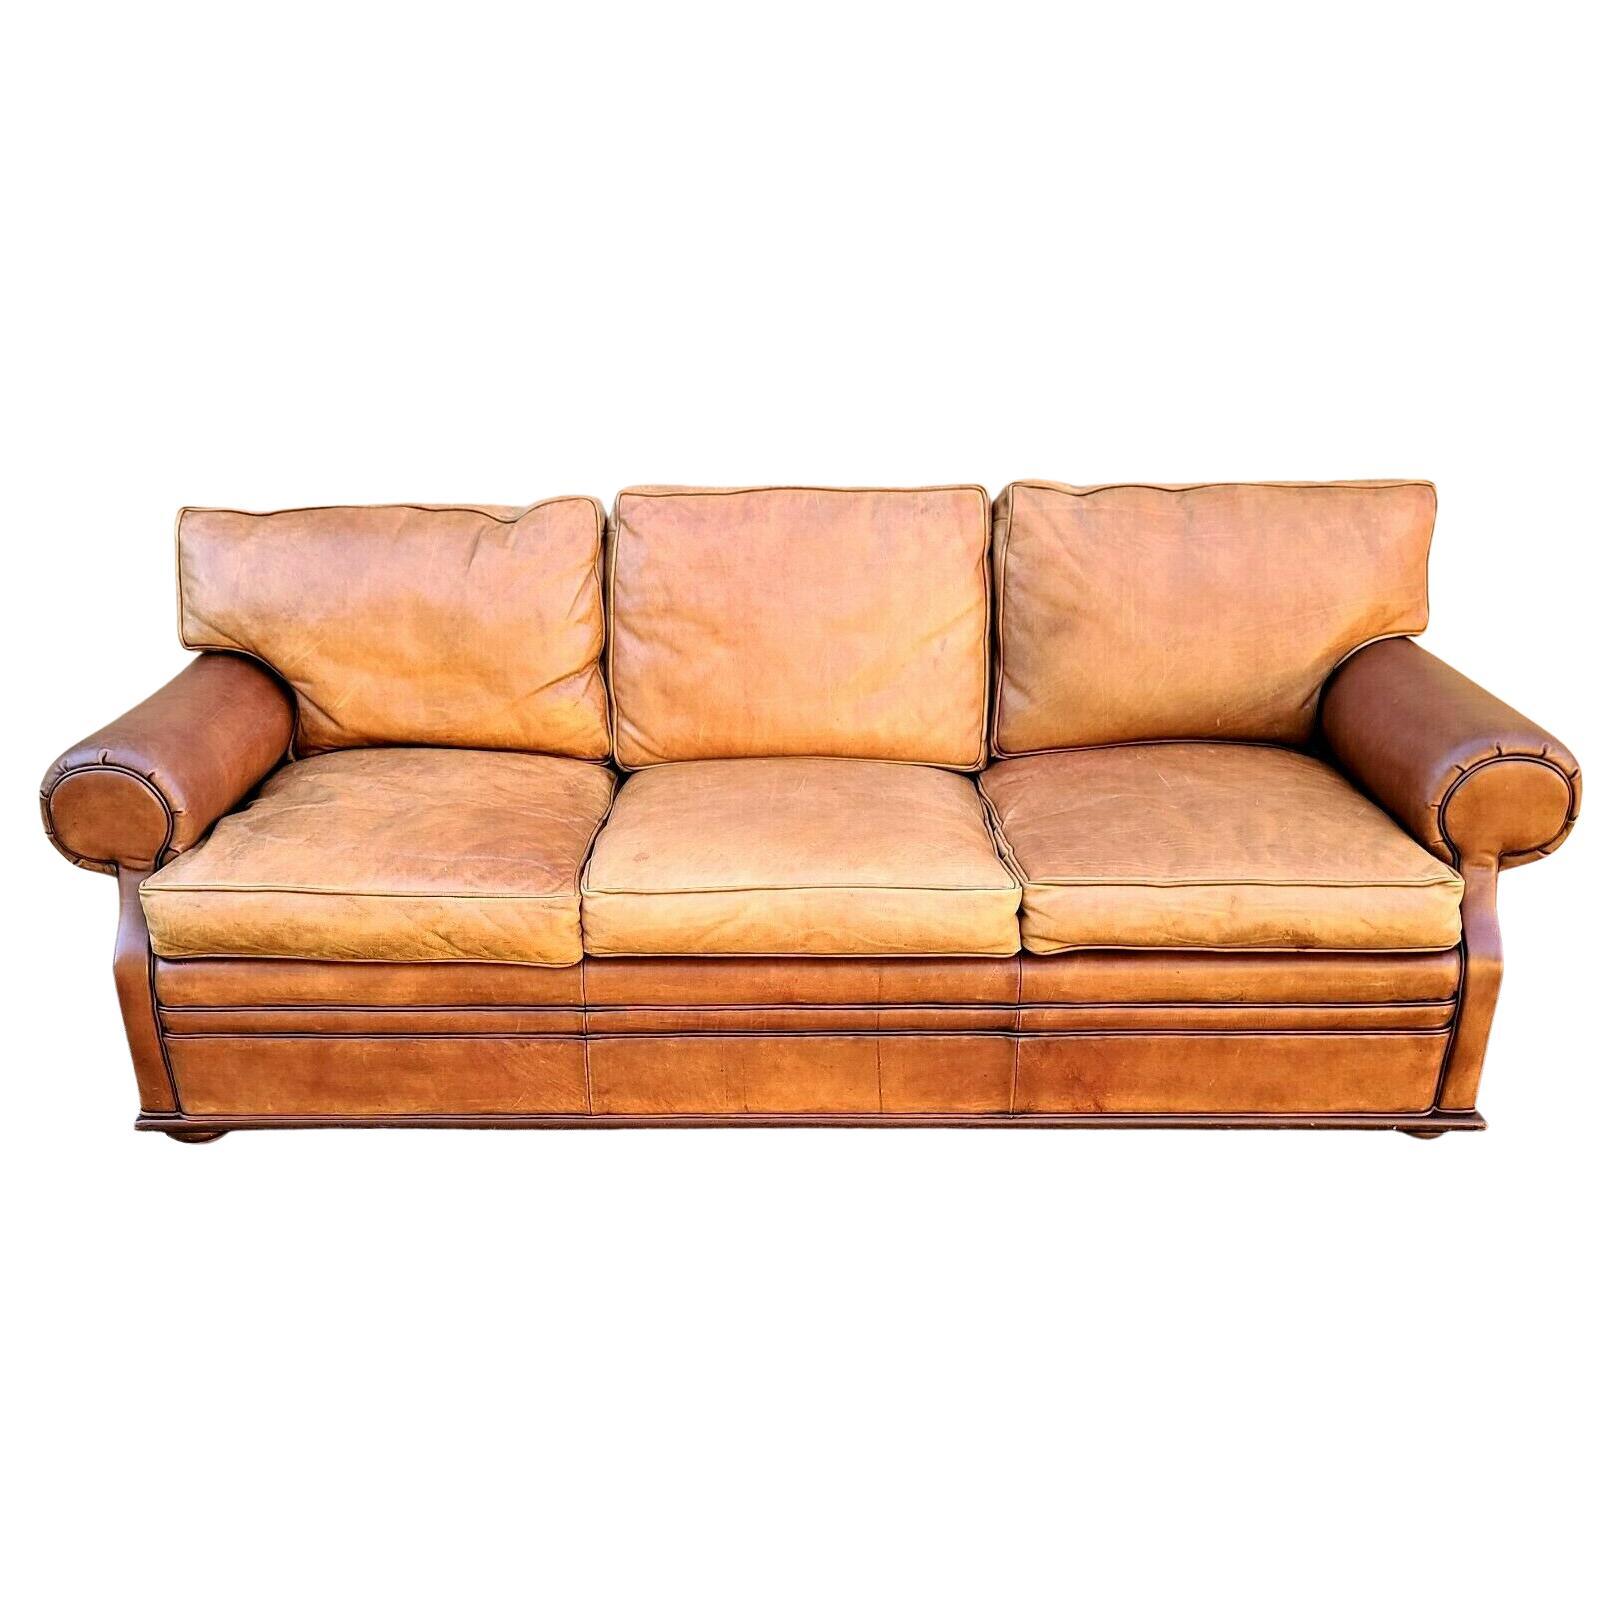 Classic Vintage Ralph Lauren Saddle Leather Sofa For Sale at 1stDibs